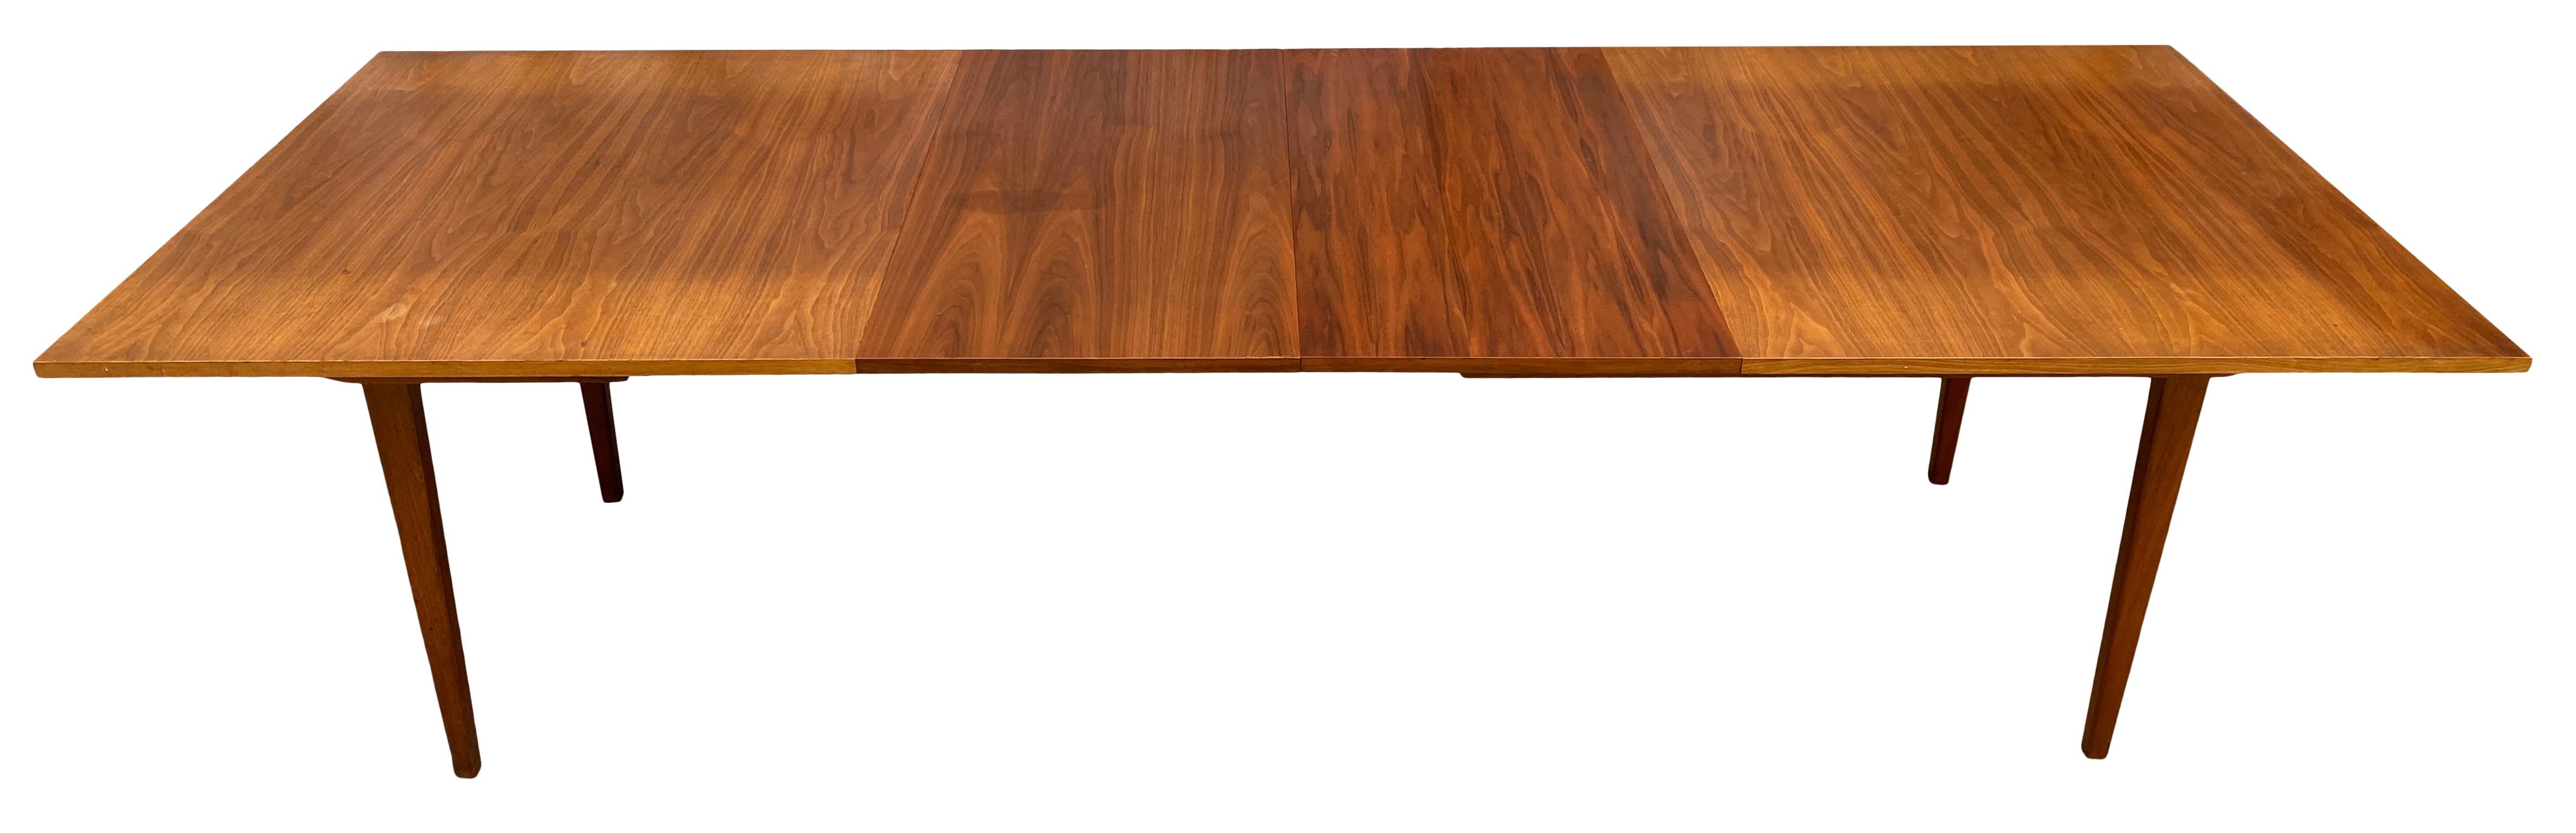 Mid-20th Century Midcentury George Nelson Herman Miller Expandable Dining Table with '2' Leaves